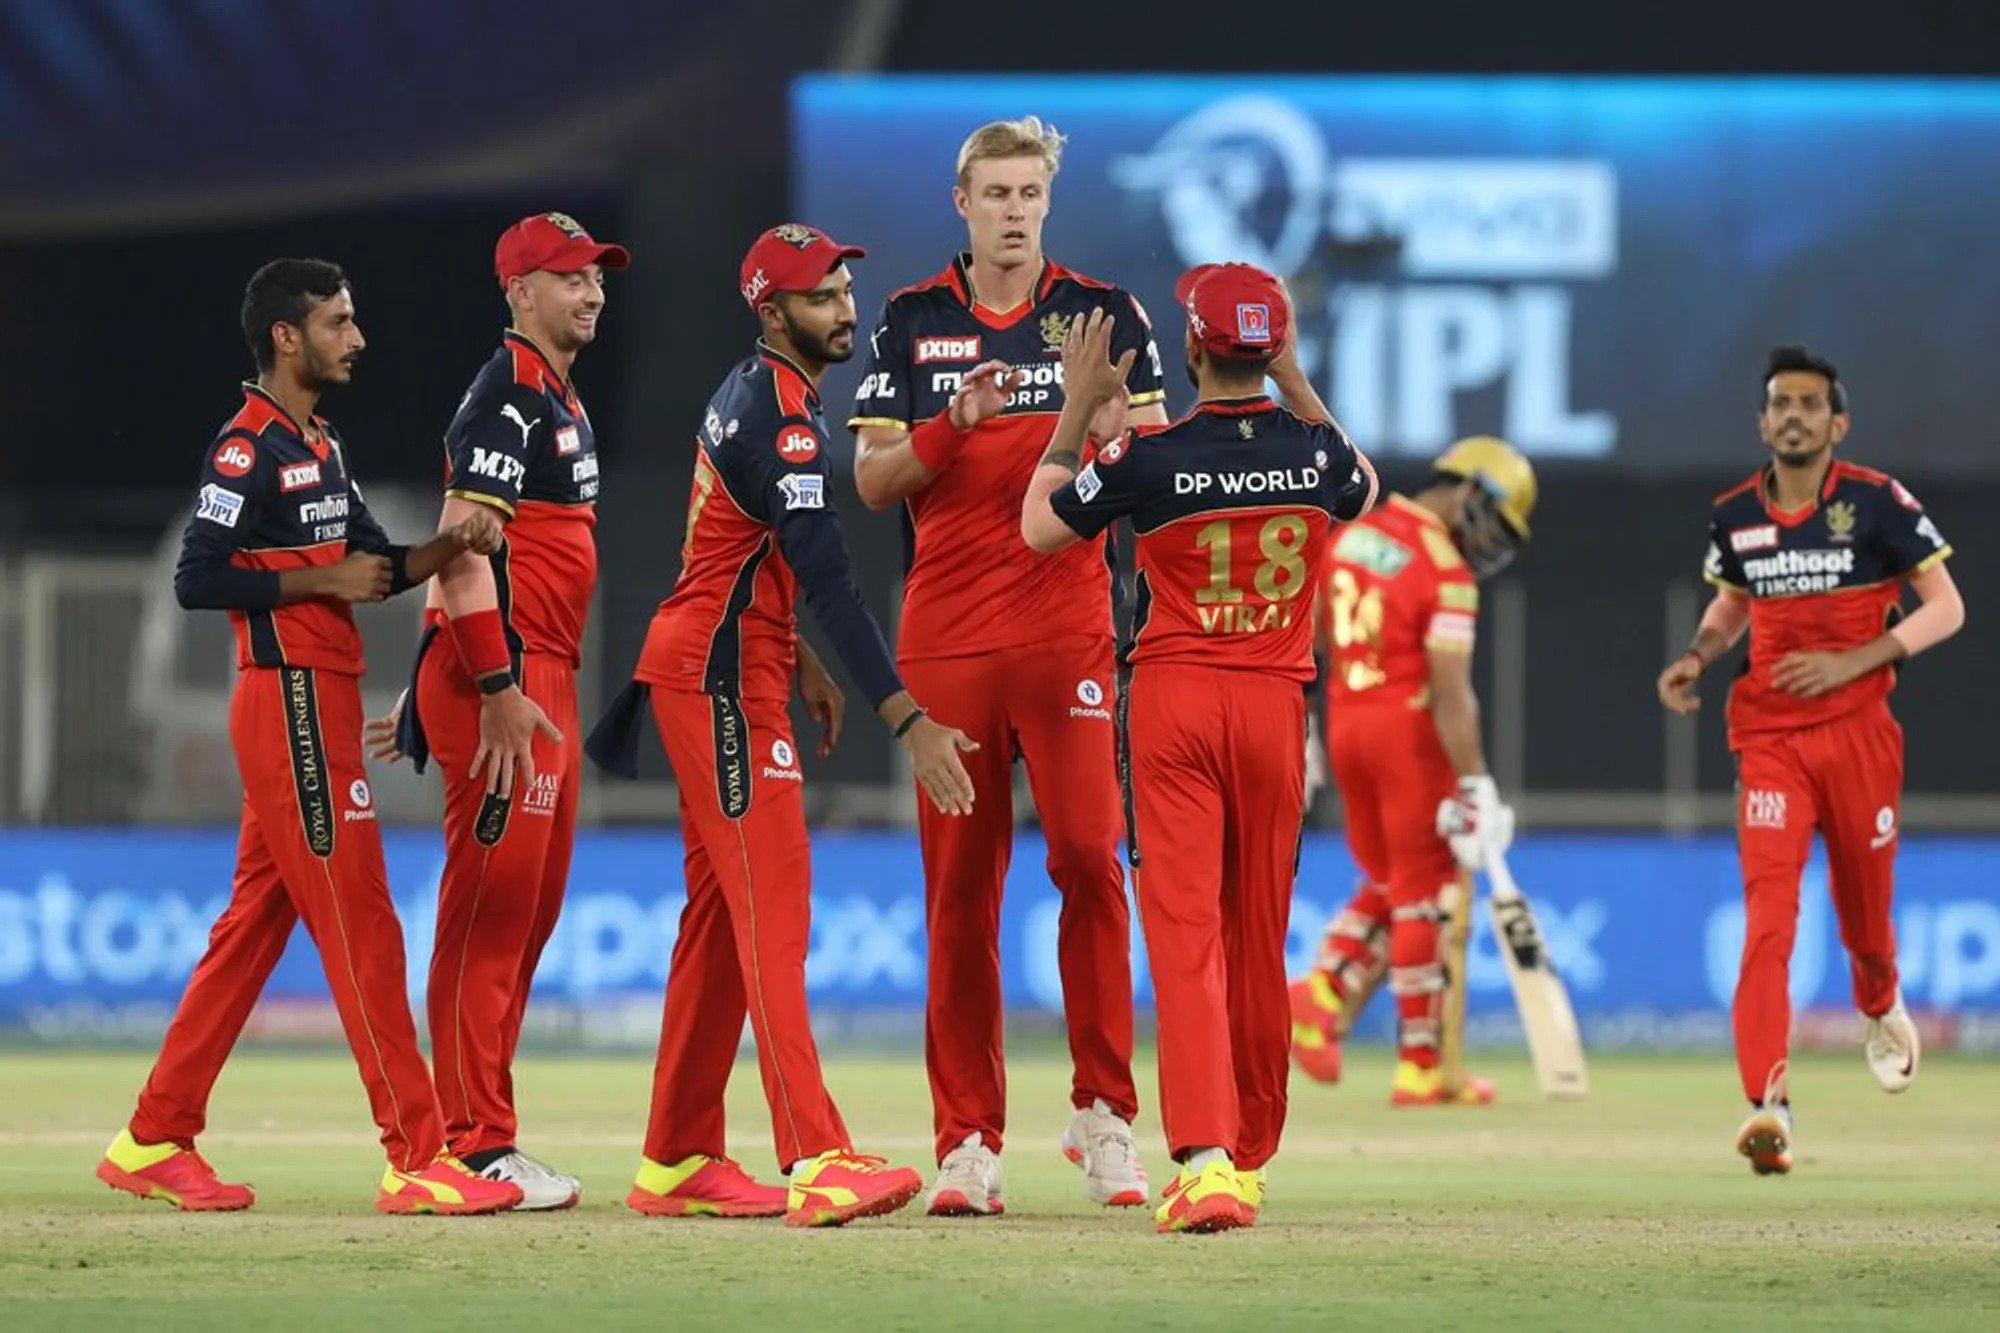 3 Reasons Why Royal Challengers Bangalore (RCB) Can Win The IPL 2021 Title In UAE